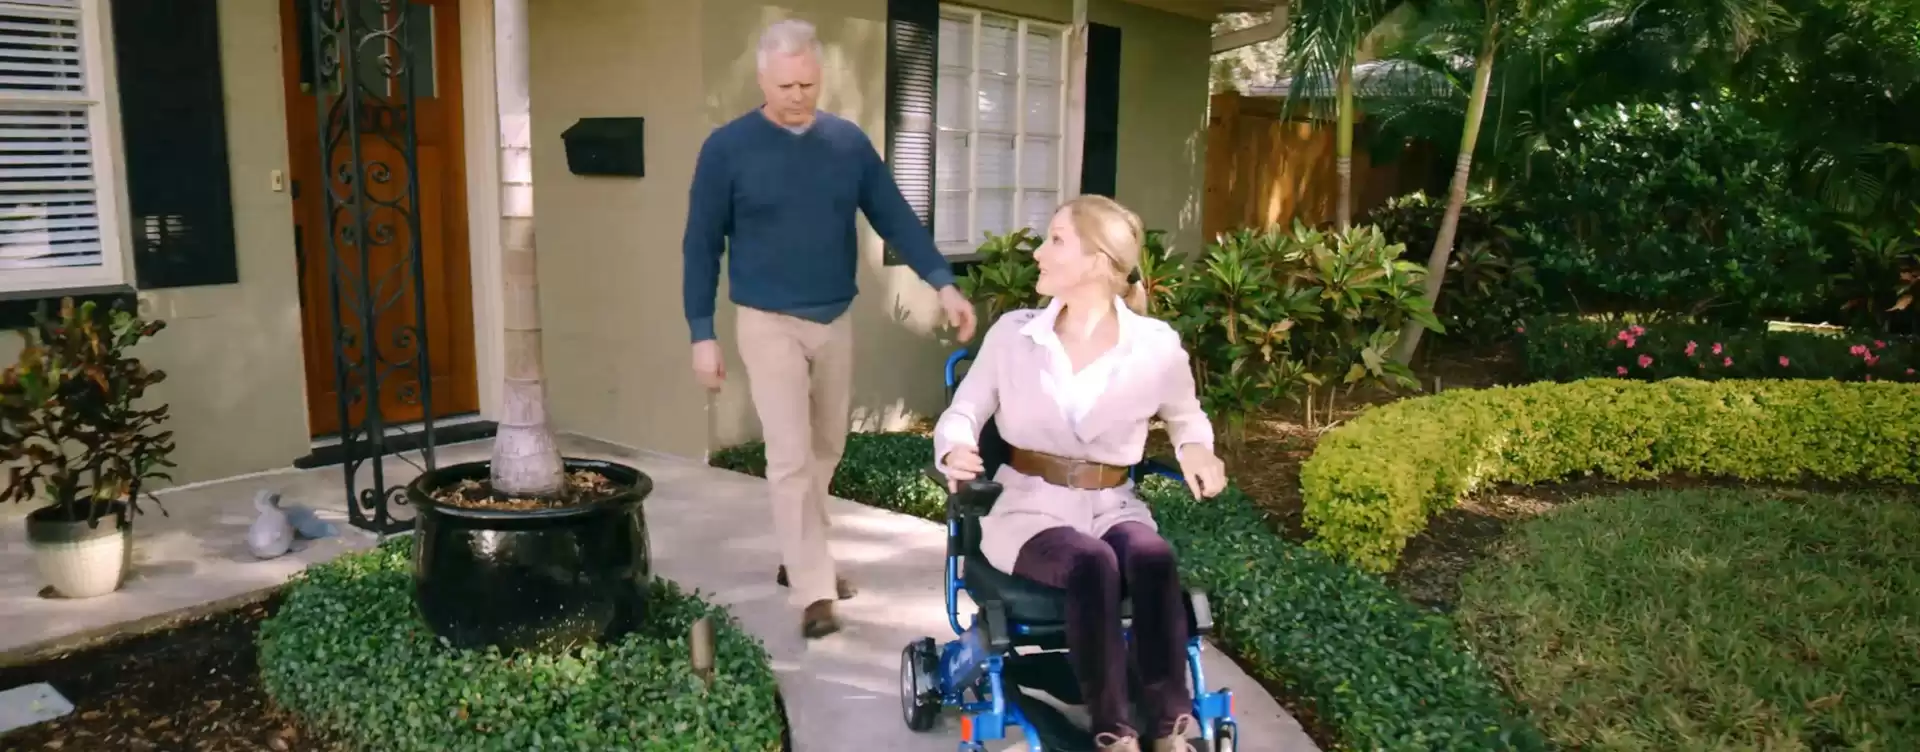 A man and woman in an electric wheelchair in front of a house.